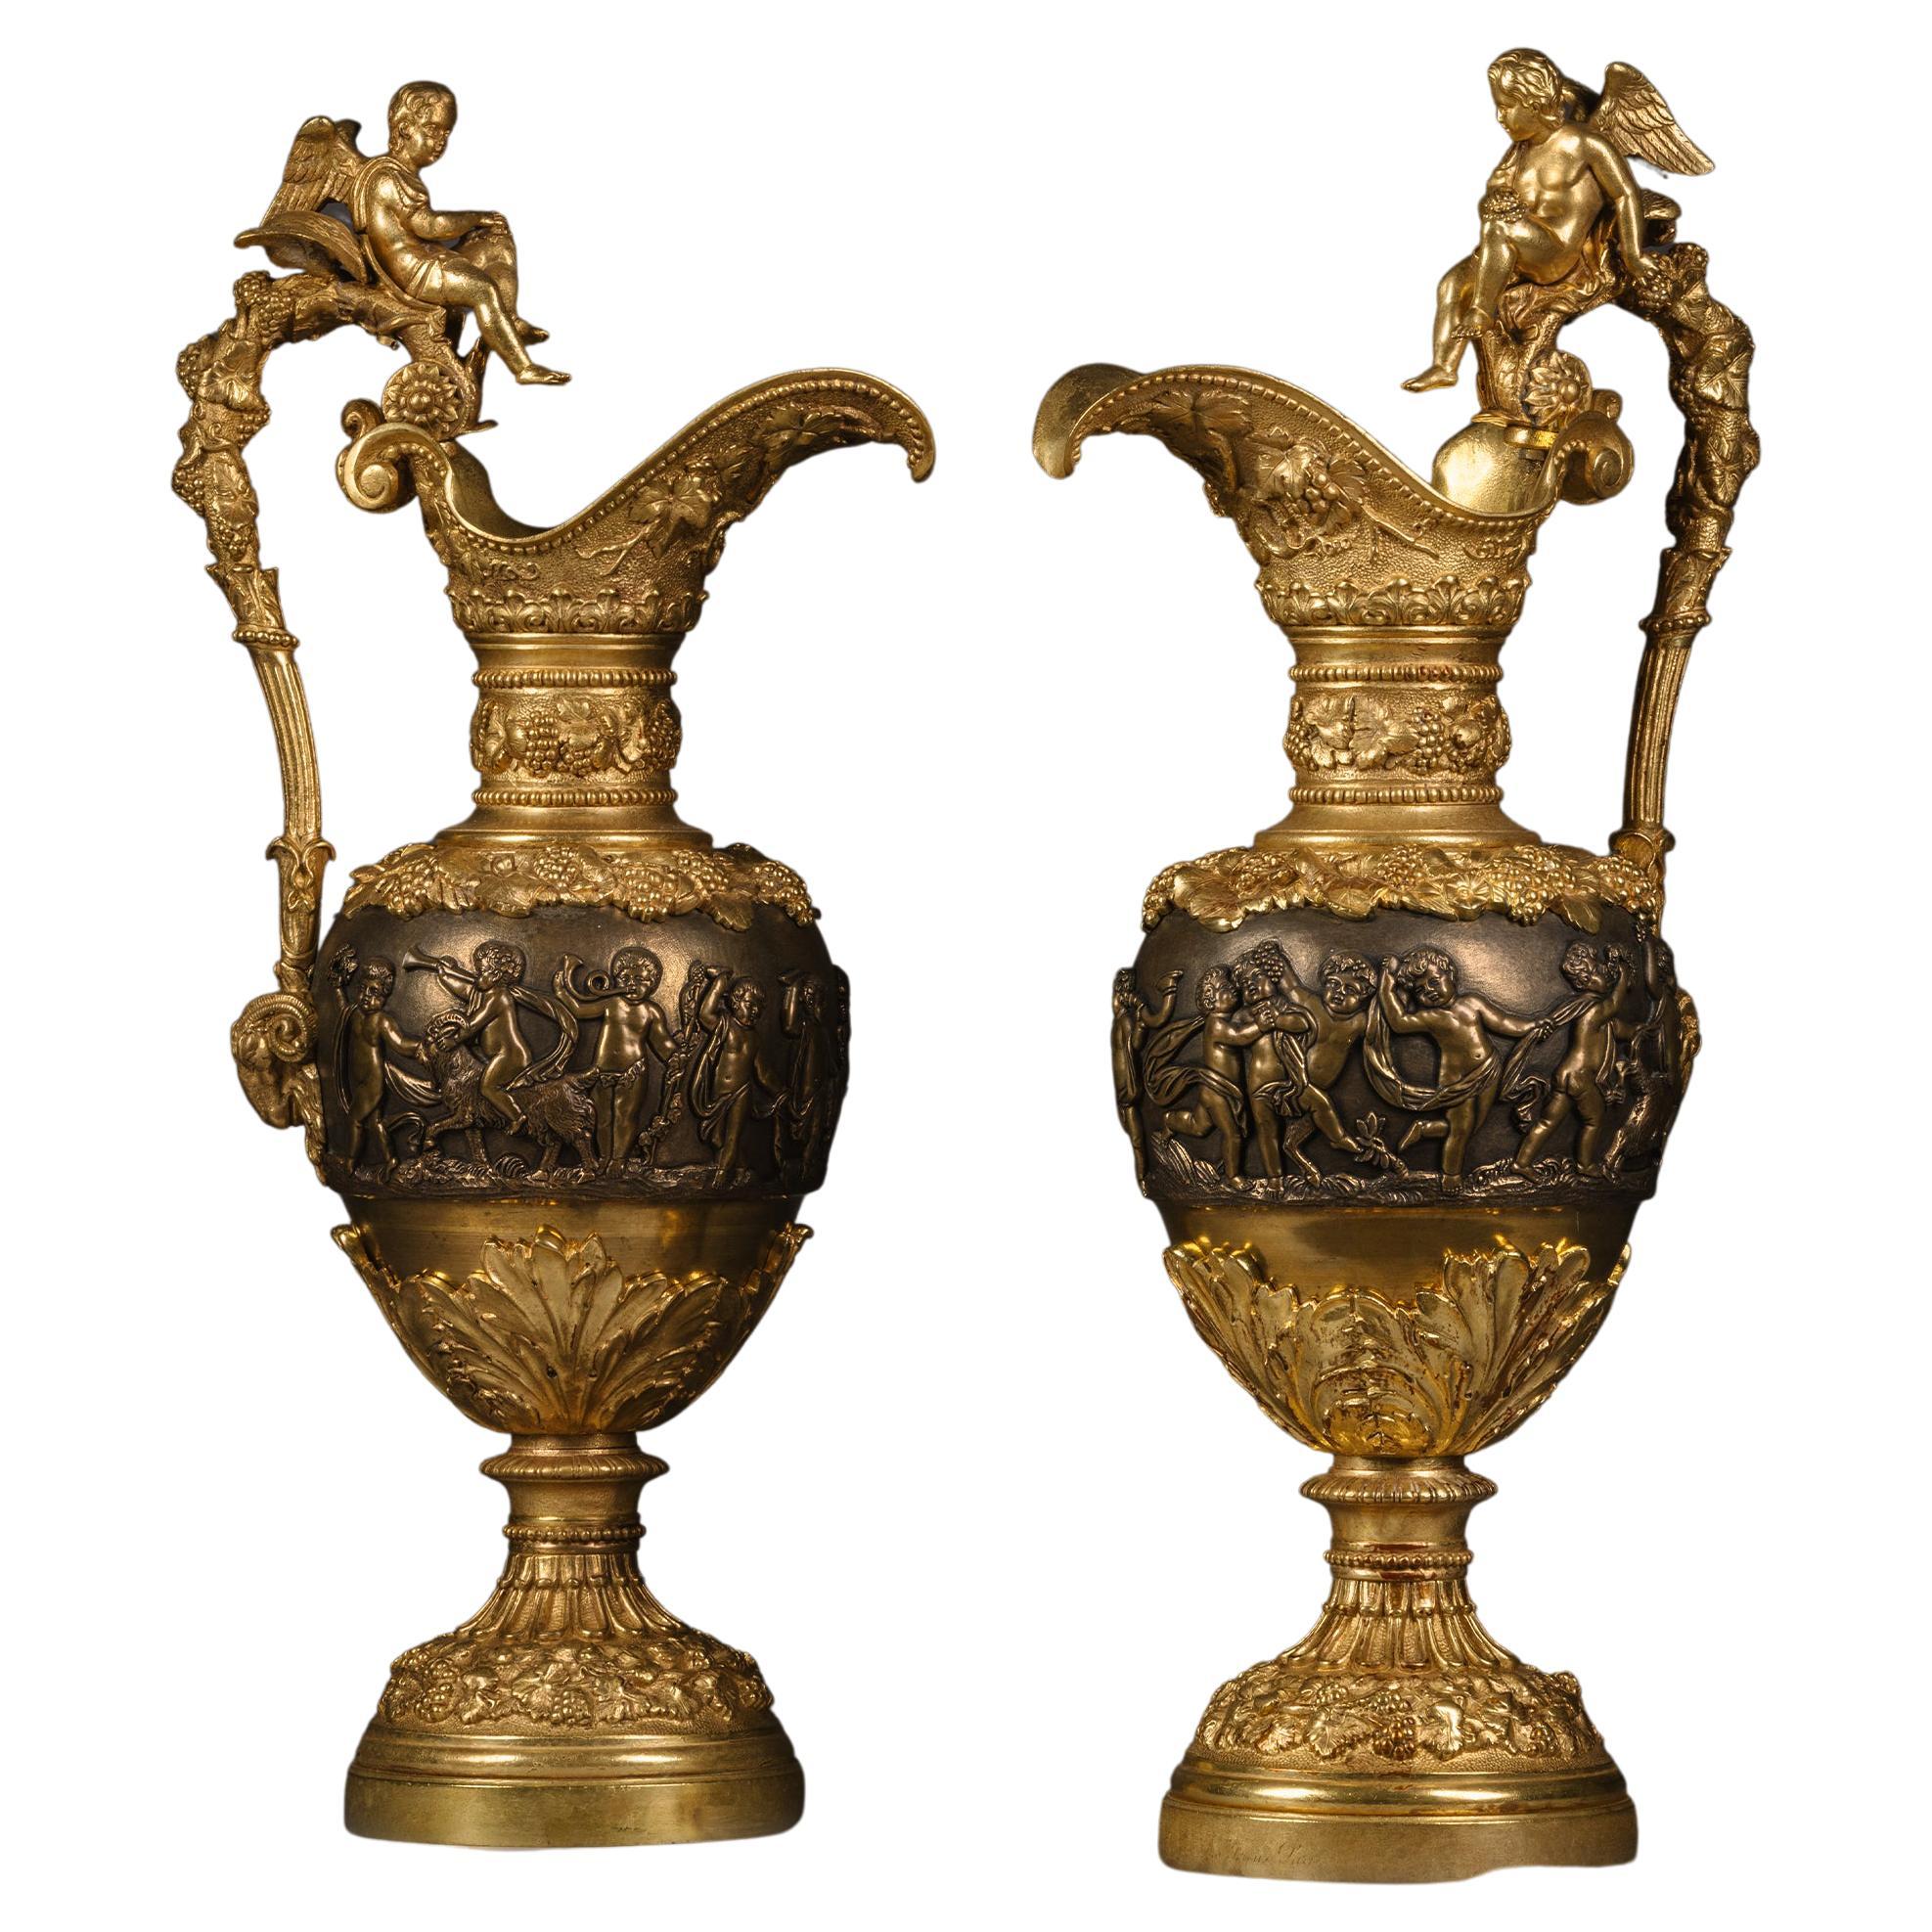 Pair of Gilt and Patinated Bronze Ewers by Maison Giroux